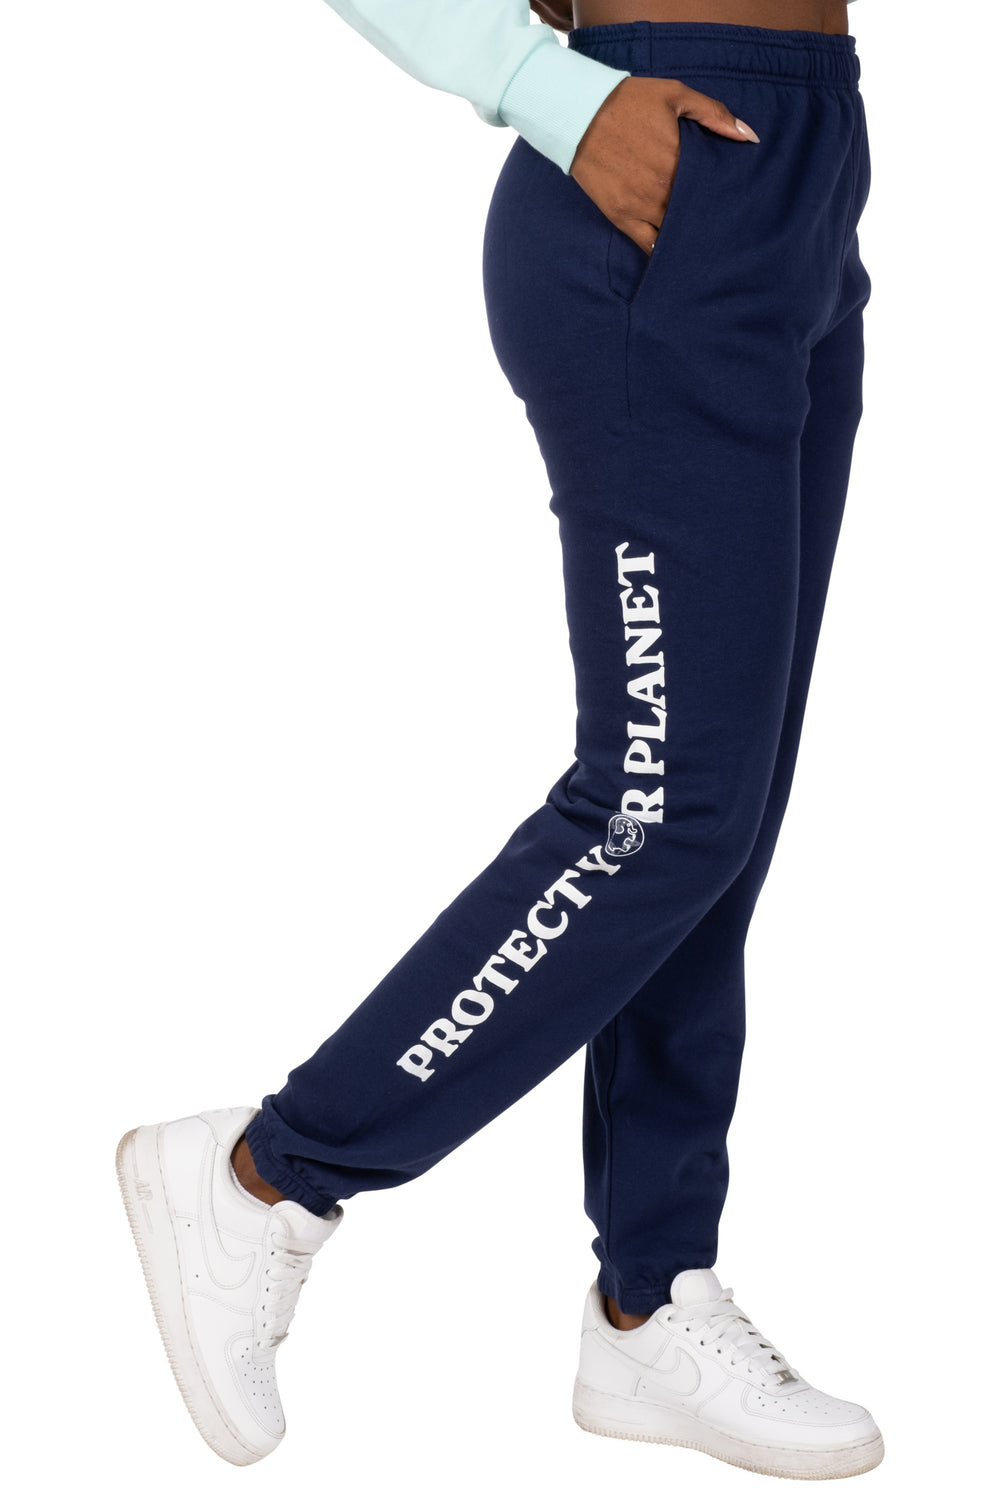 Protect Our Planet Sweatpants